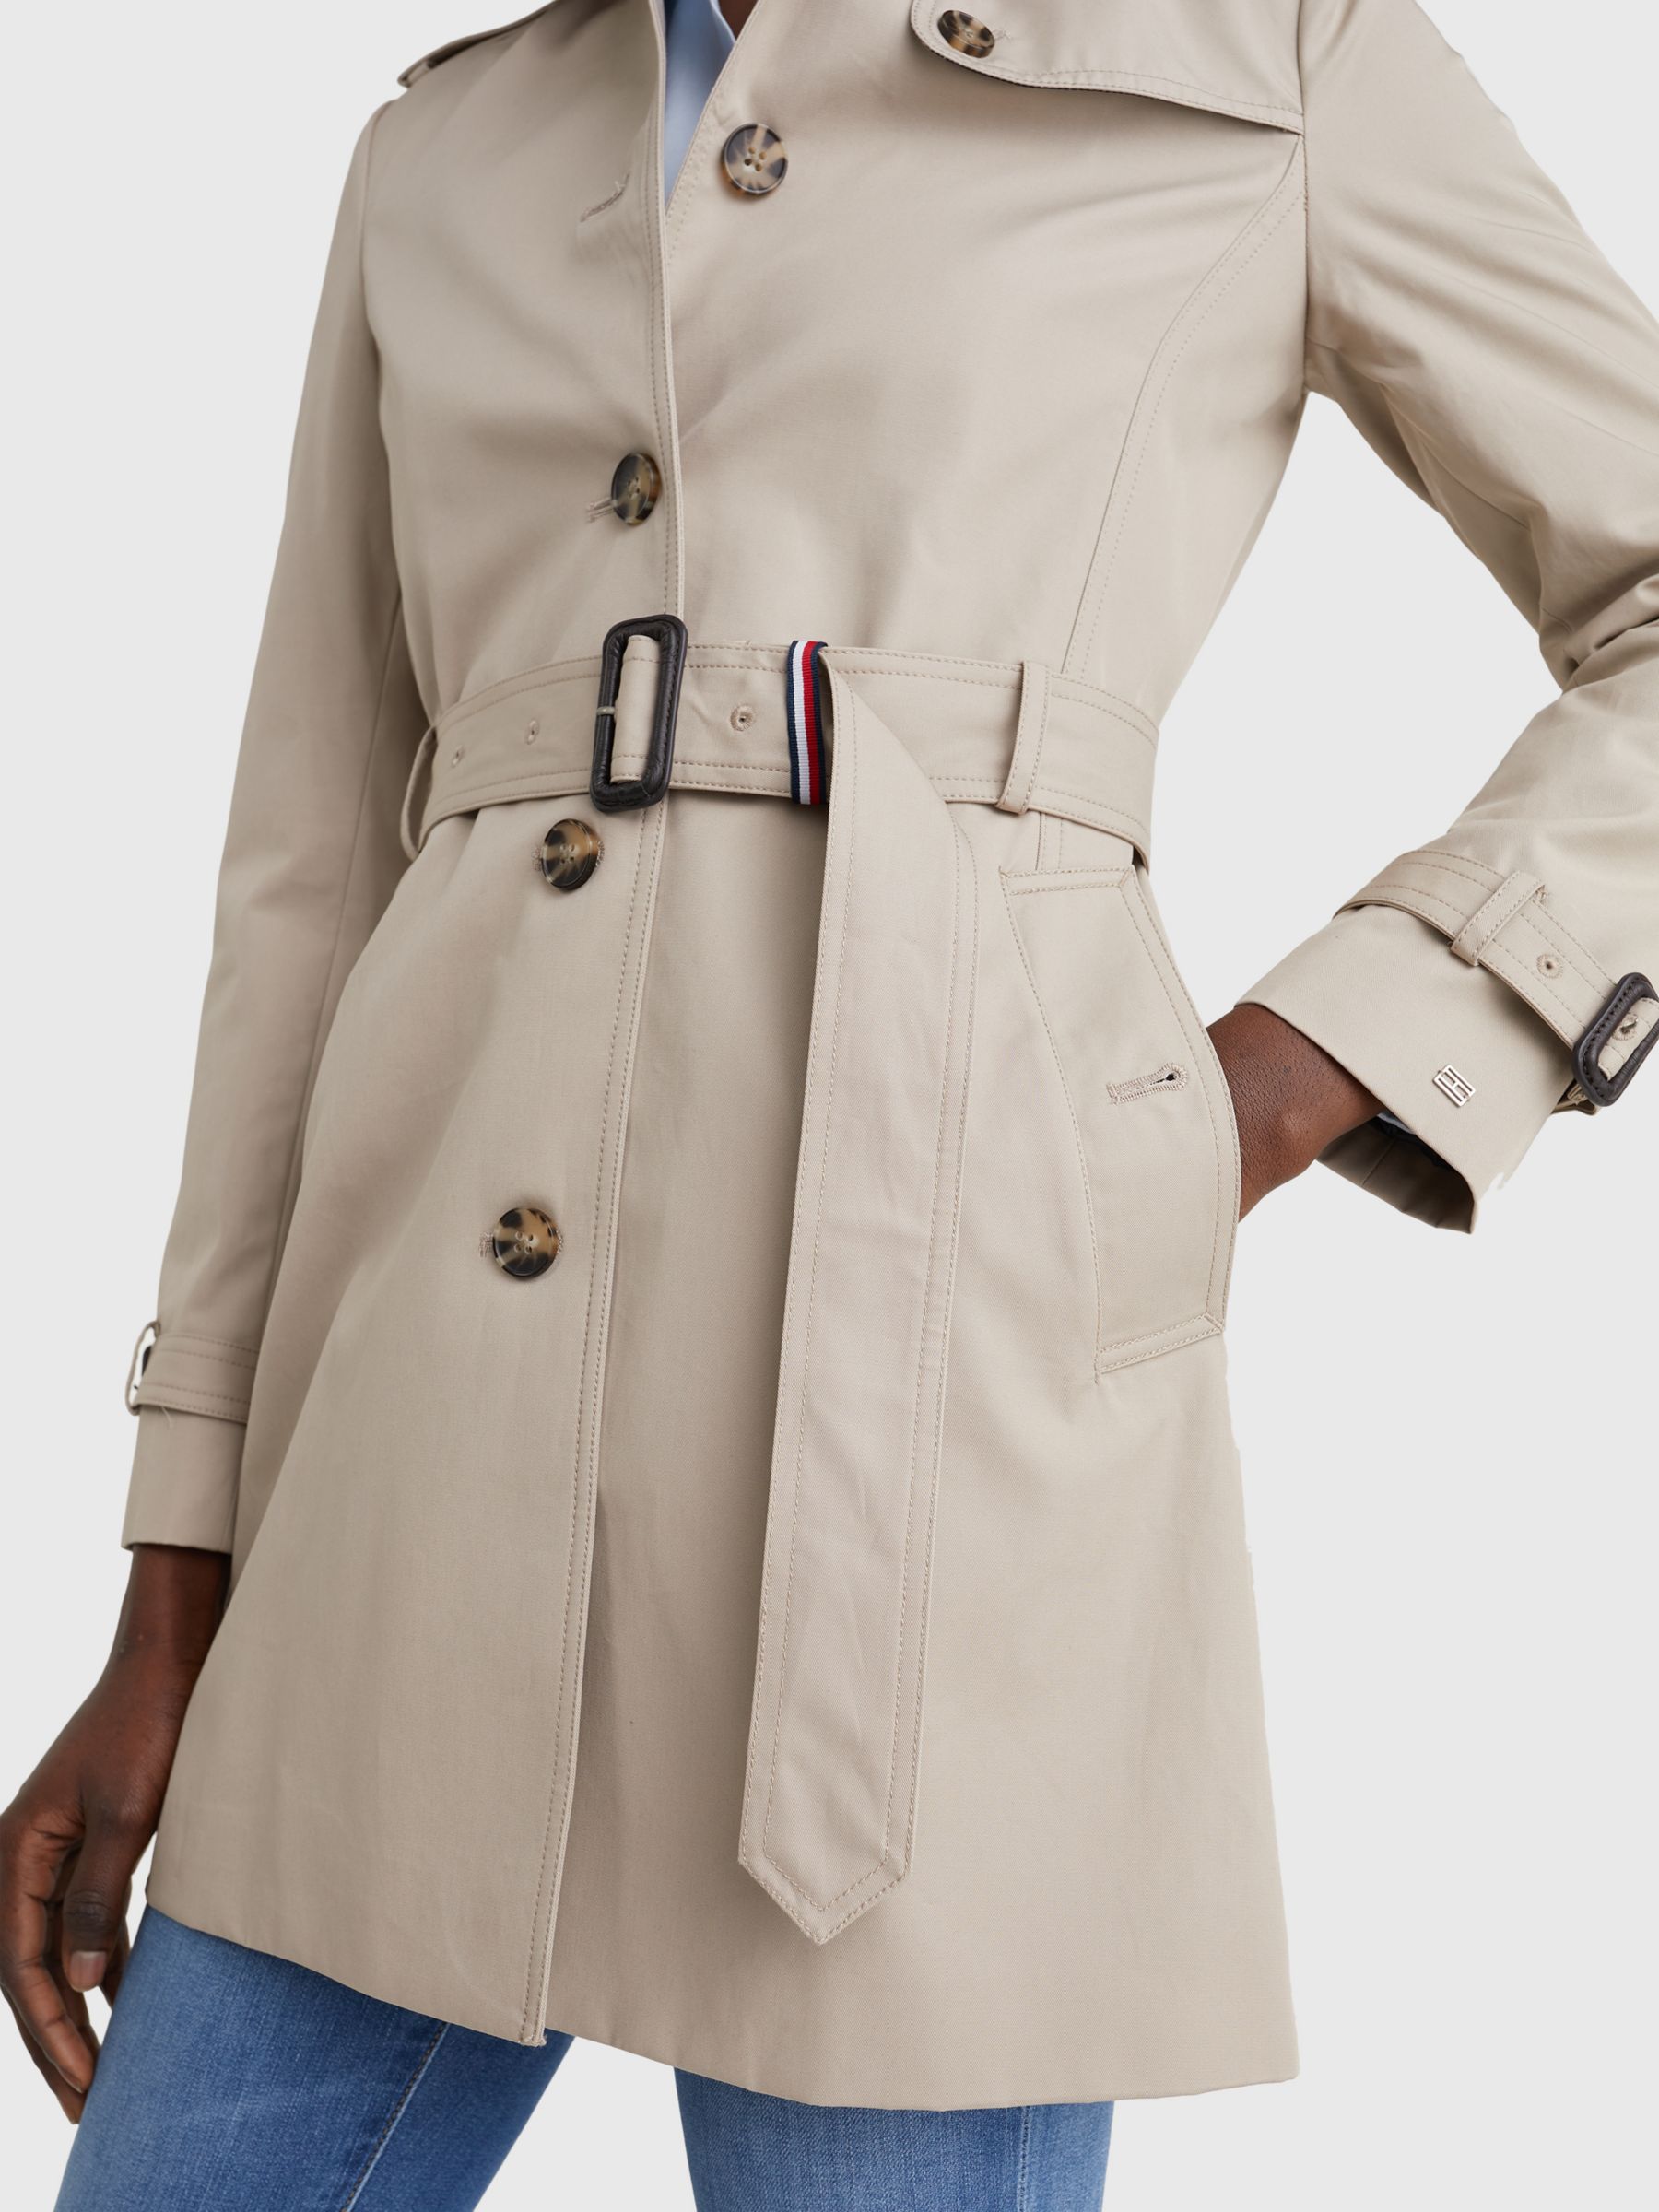 Hilfiger Heritage Single Breasted Trench Coat, Medium Taupe at John Lewis & Partners